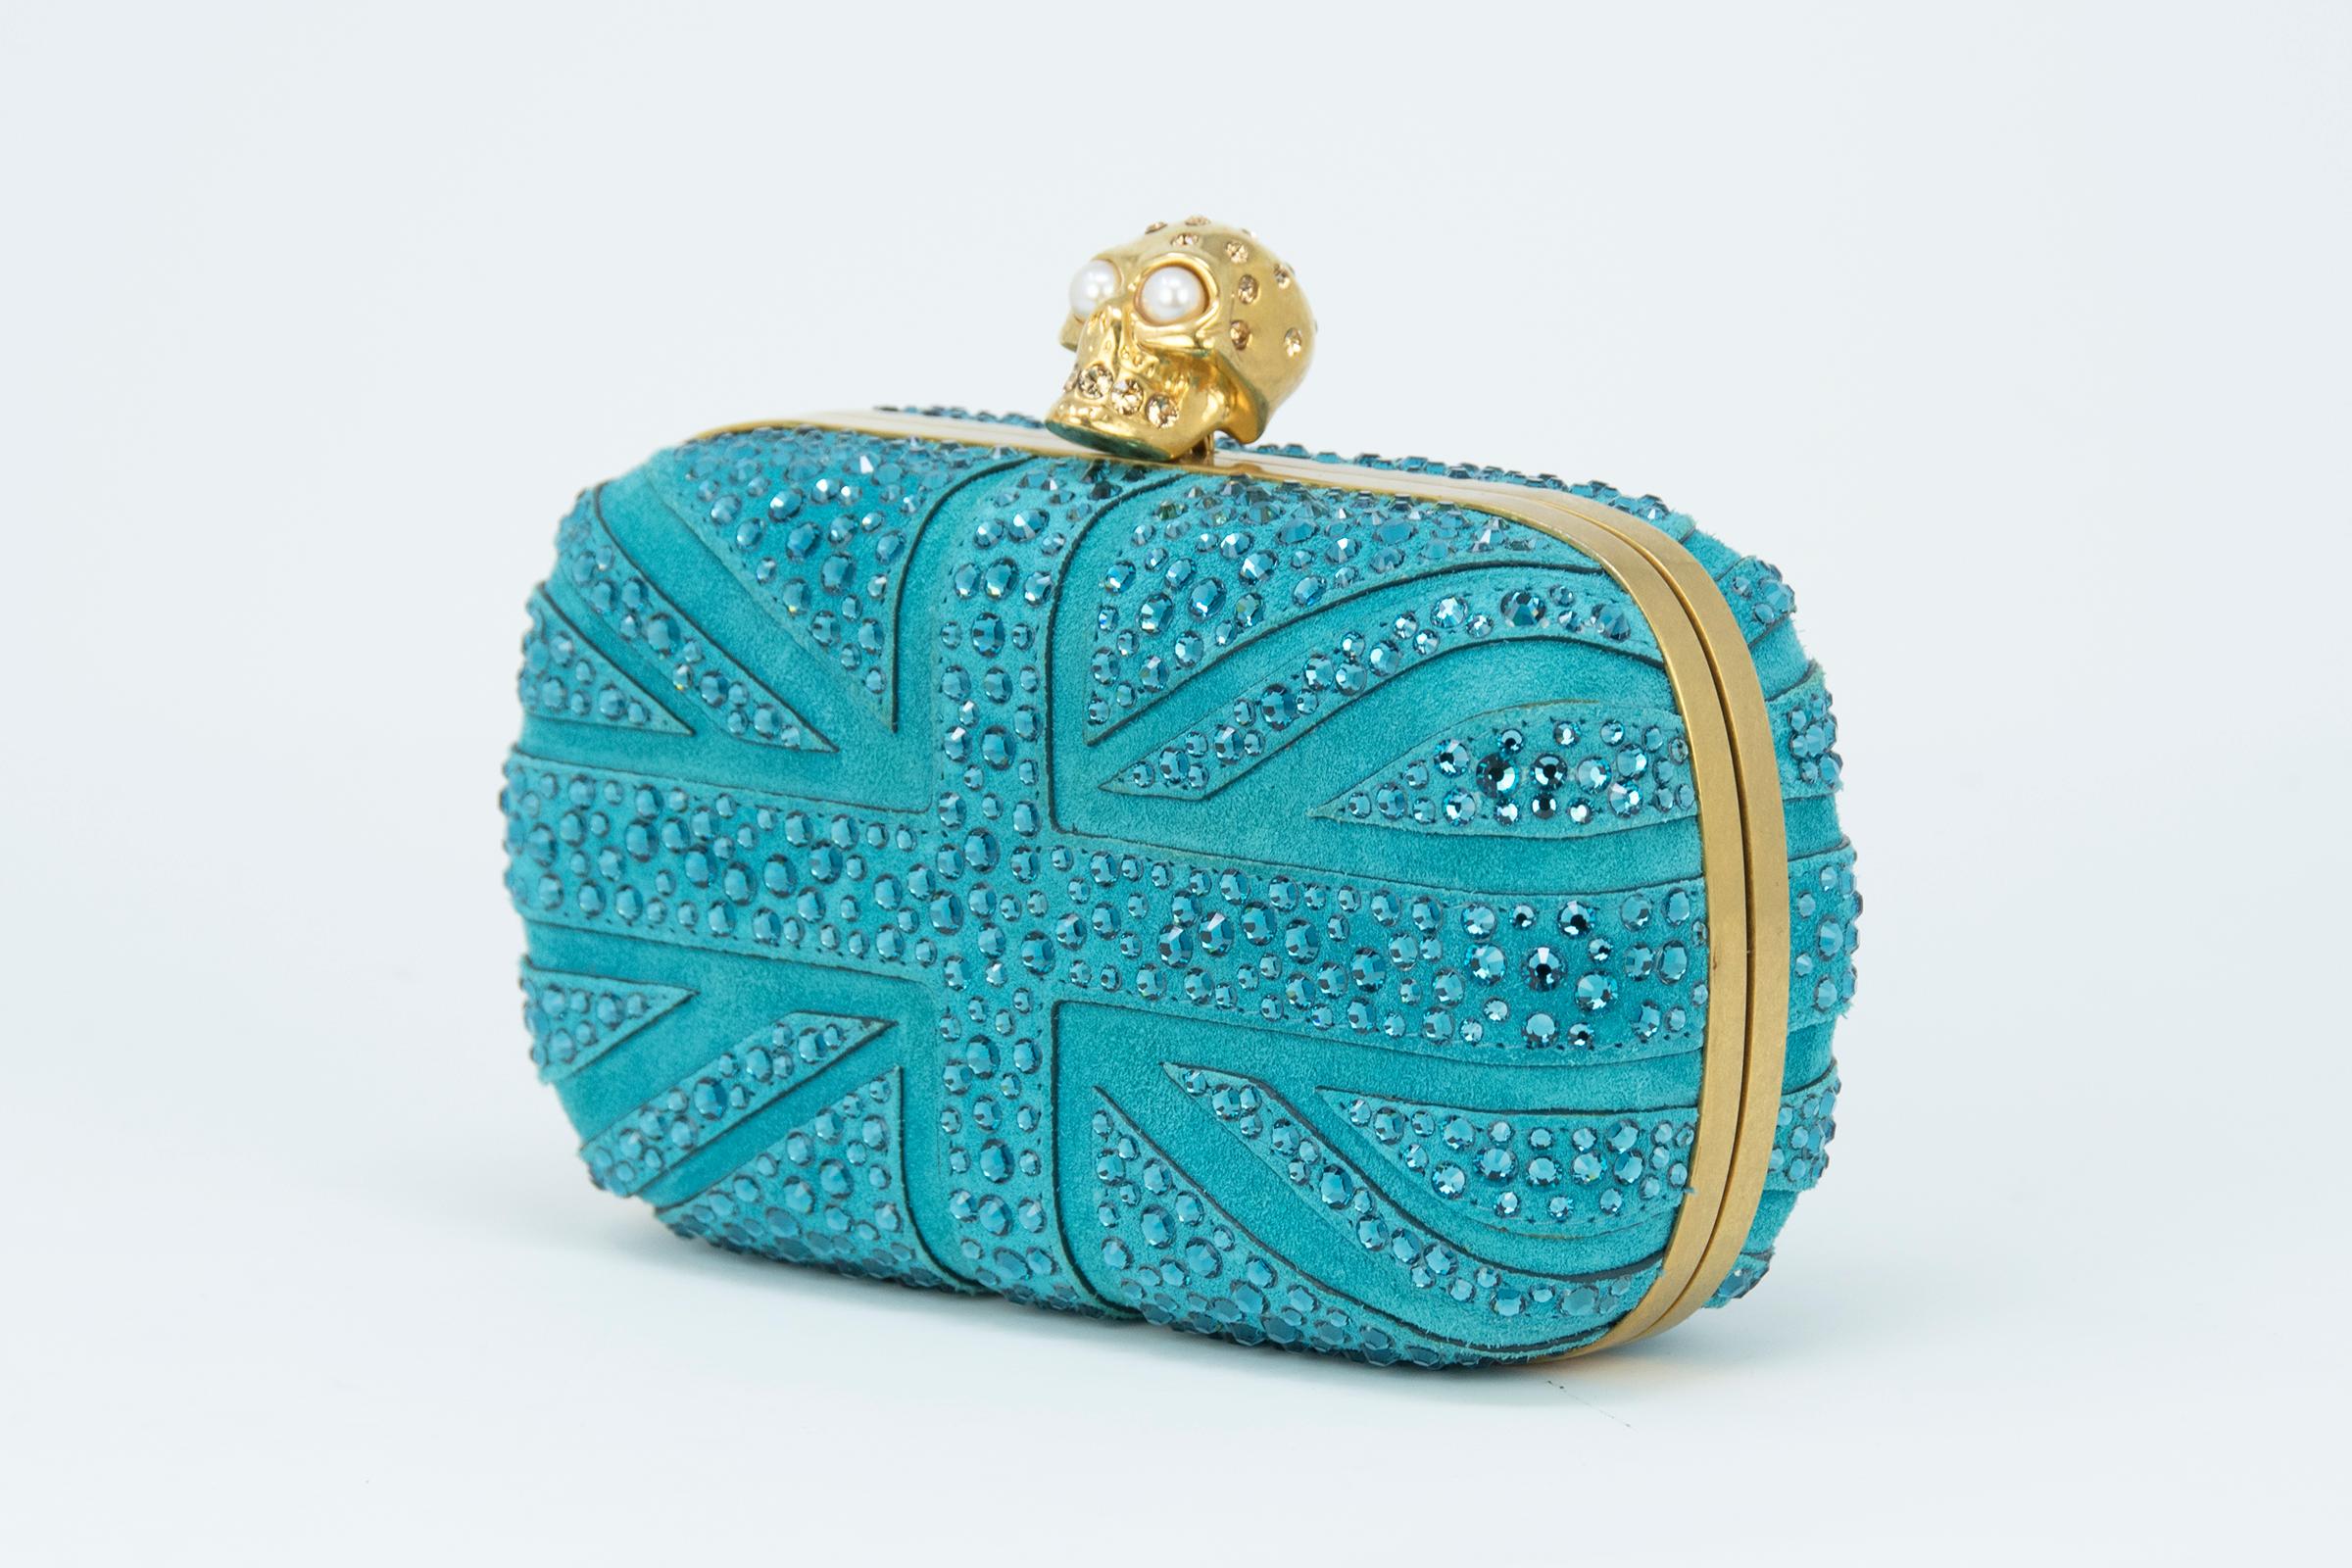 Alexander McQueen Britannia Skull Box Clutch in blue suede Union Jack flag inspired design with signature gold skull hardware with rhinestone and pearl embellishments.

Condition: New condition

Dimensions (Approximate): 3.9